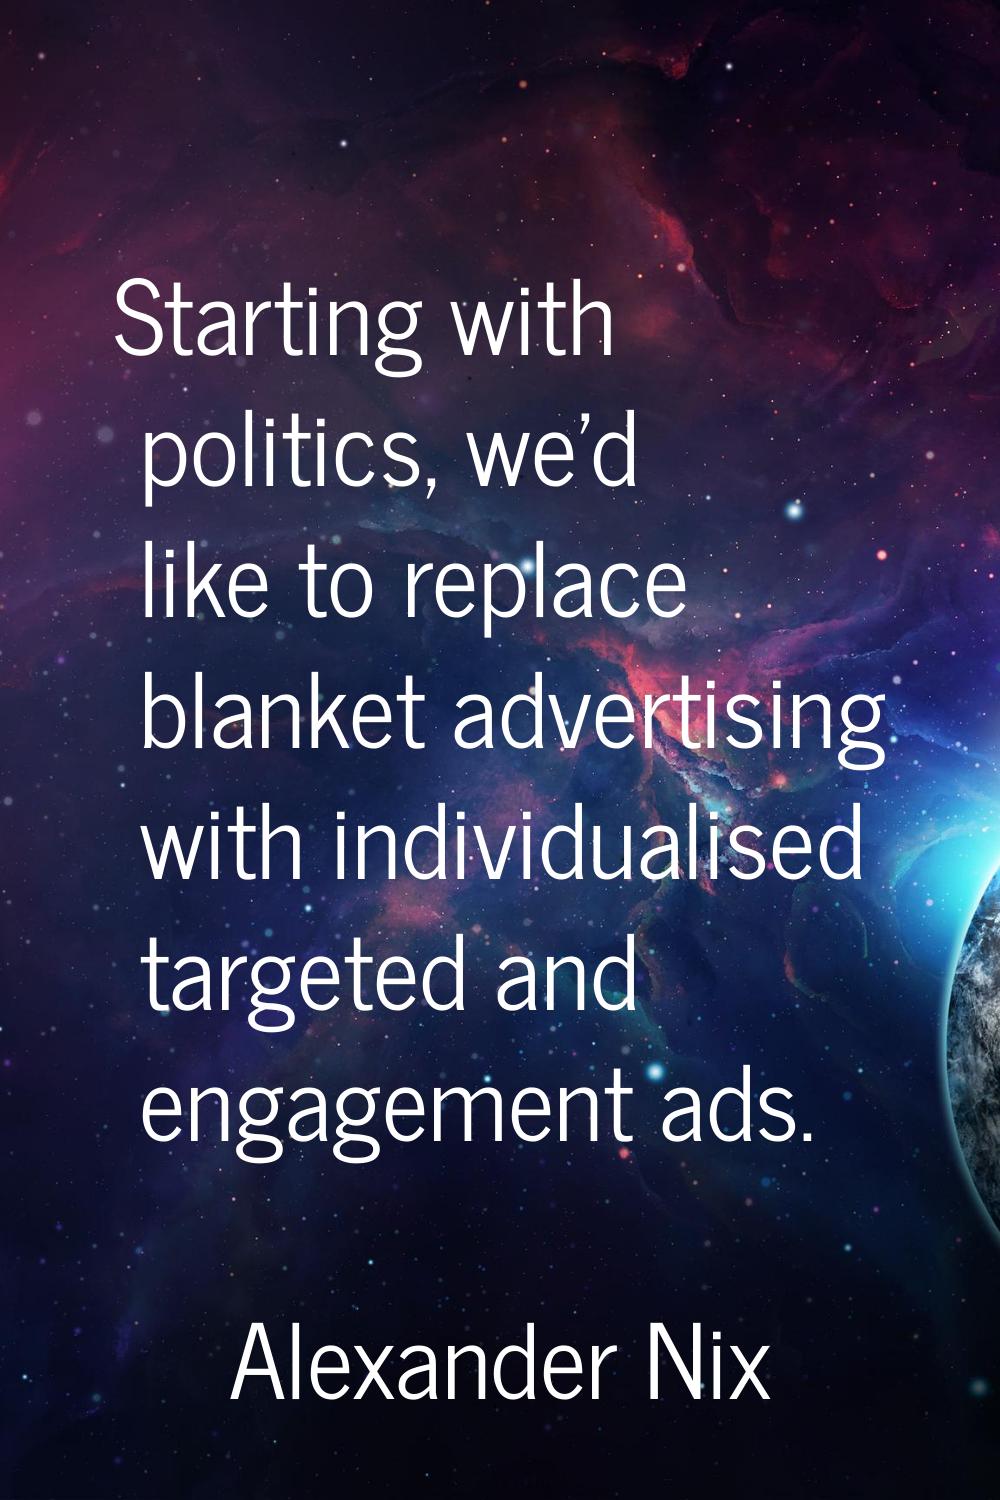 Starting with politics, we'd like to replace blanket advertising with individualised targeted and e